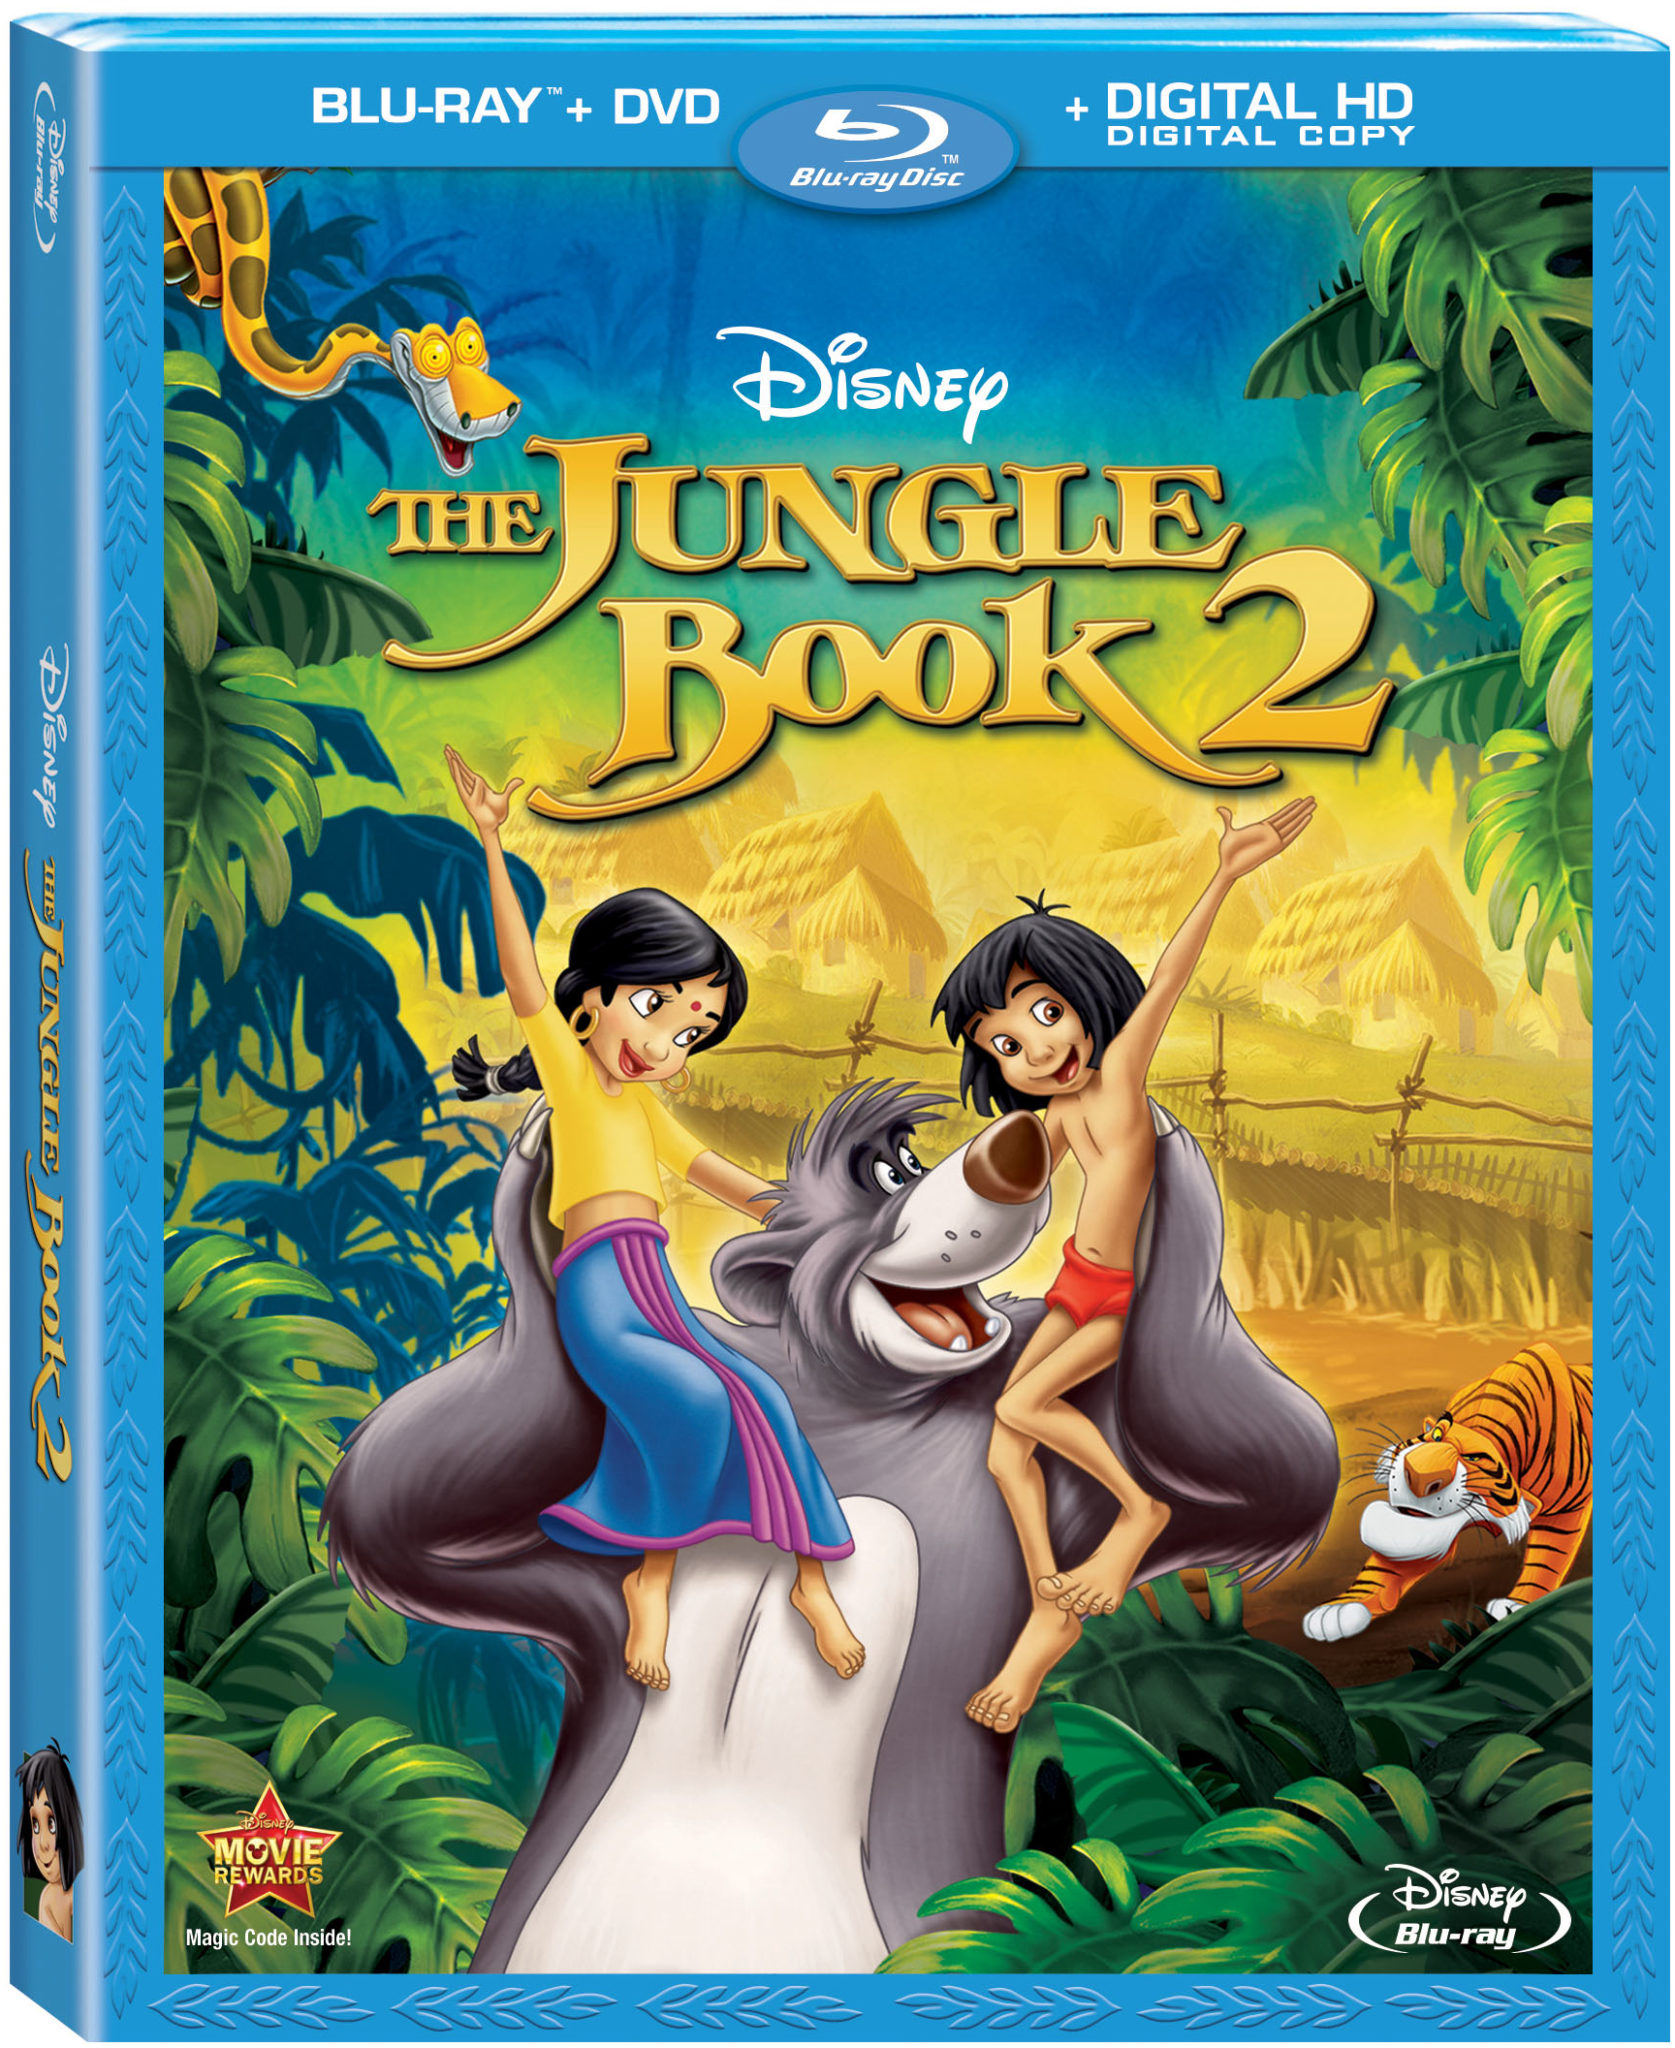 The Jungle Book 2' Blu-ray/DVD Review - Rotoscopers